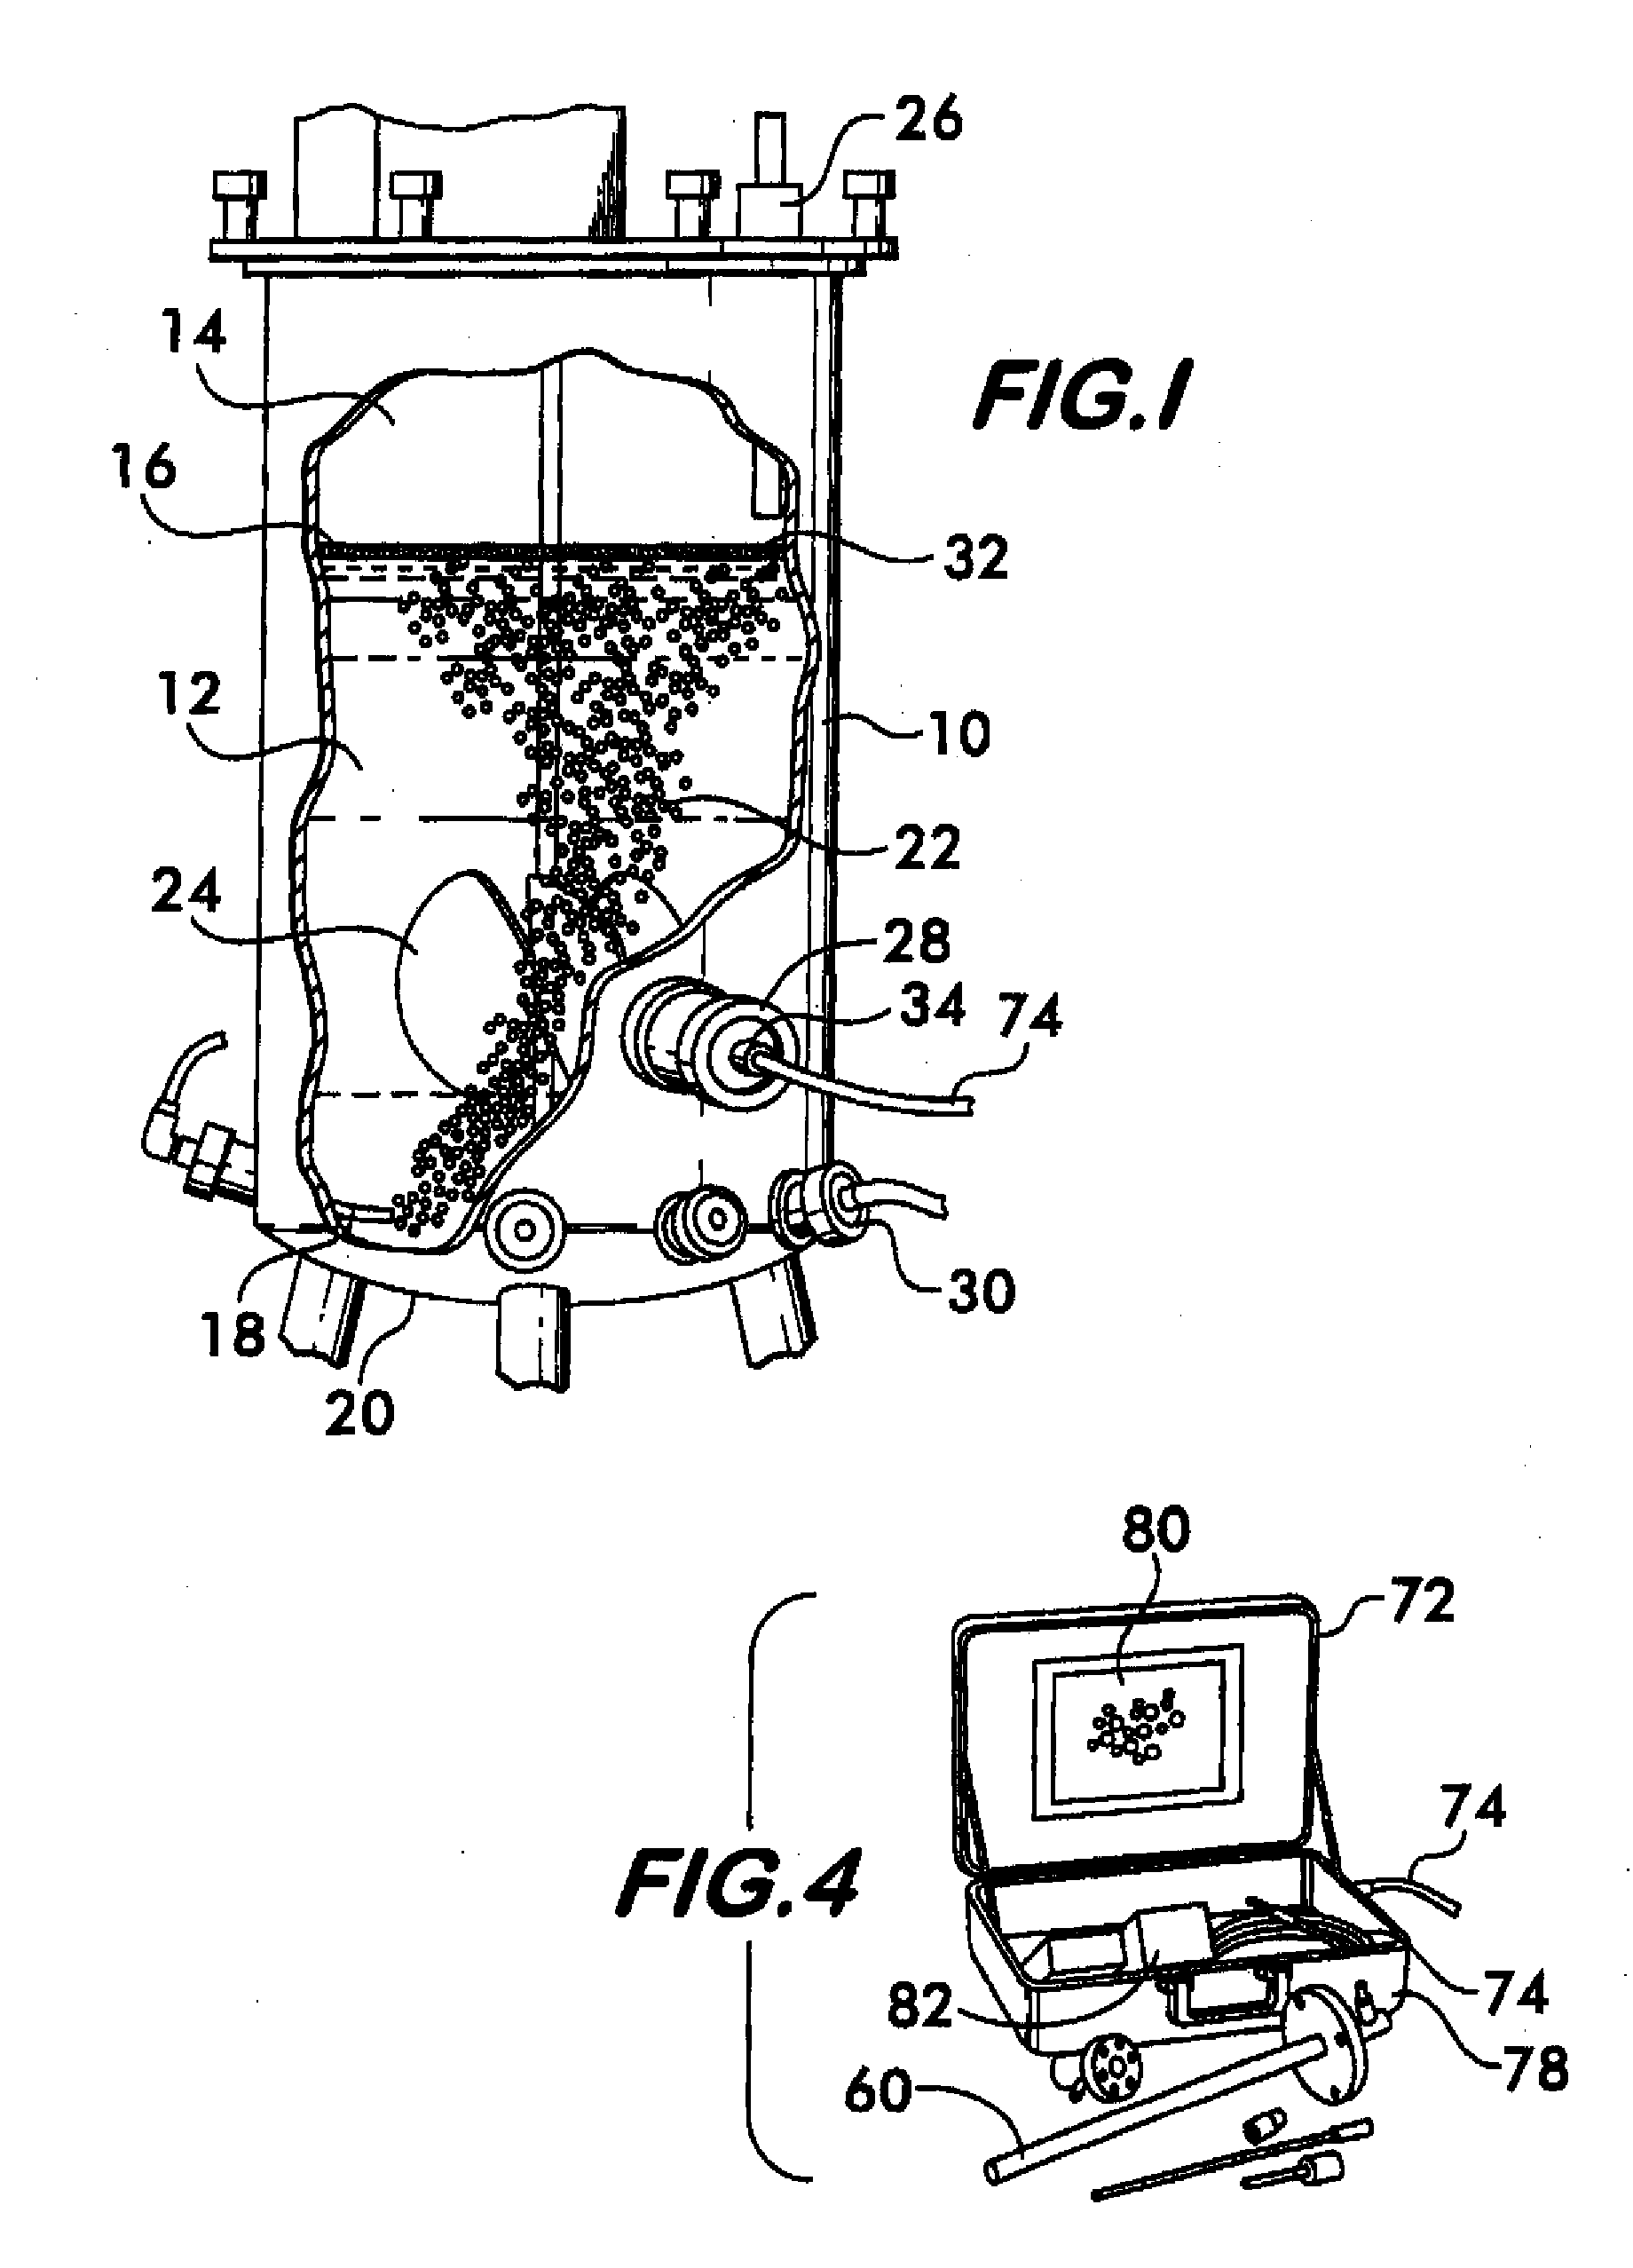 Vision analysis system for a process vessel